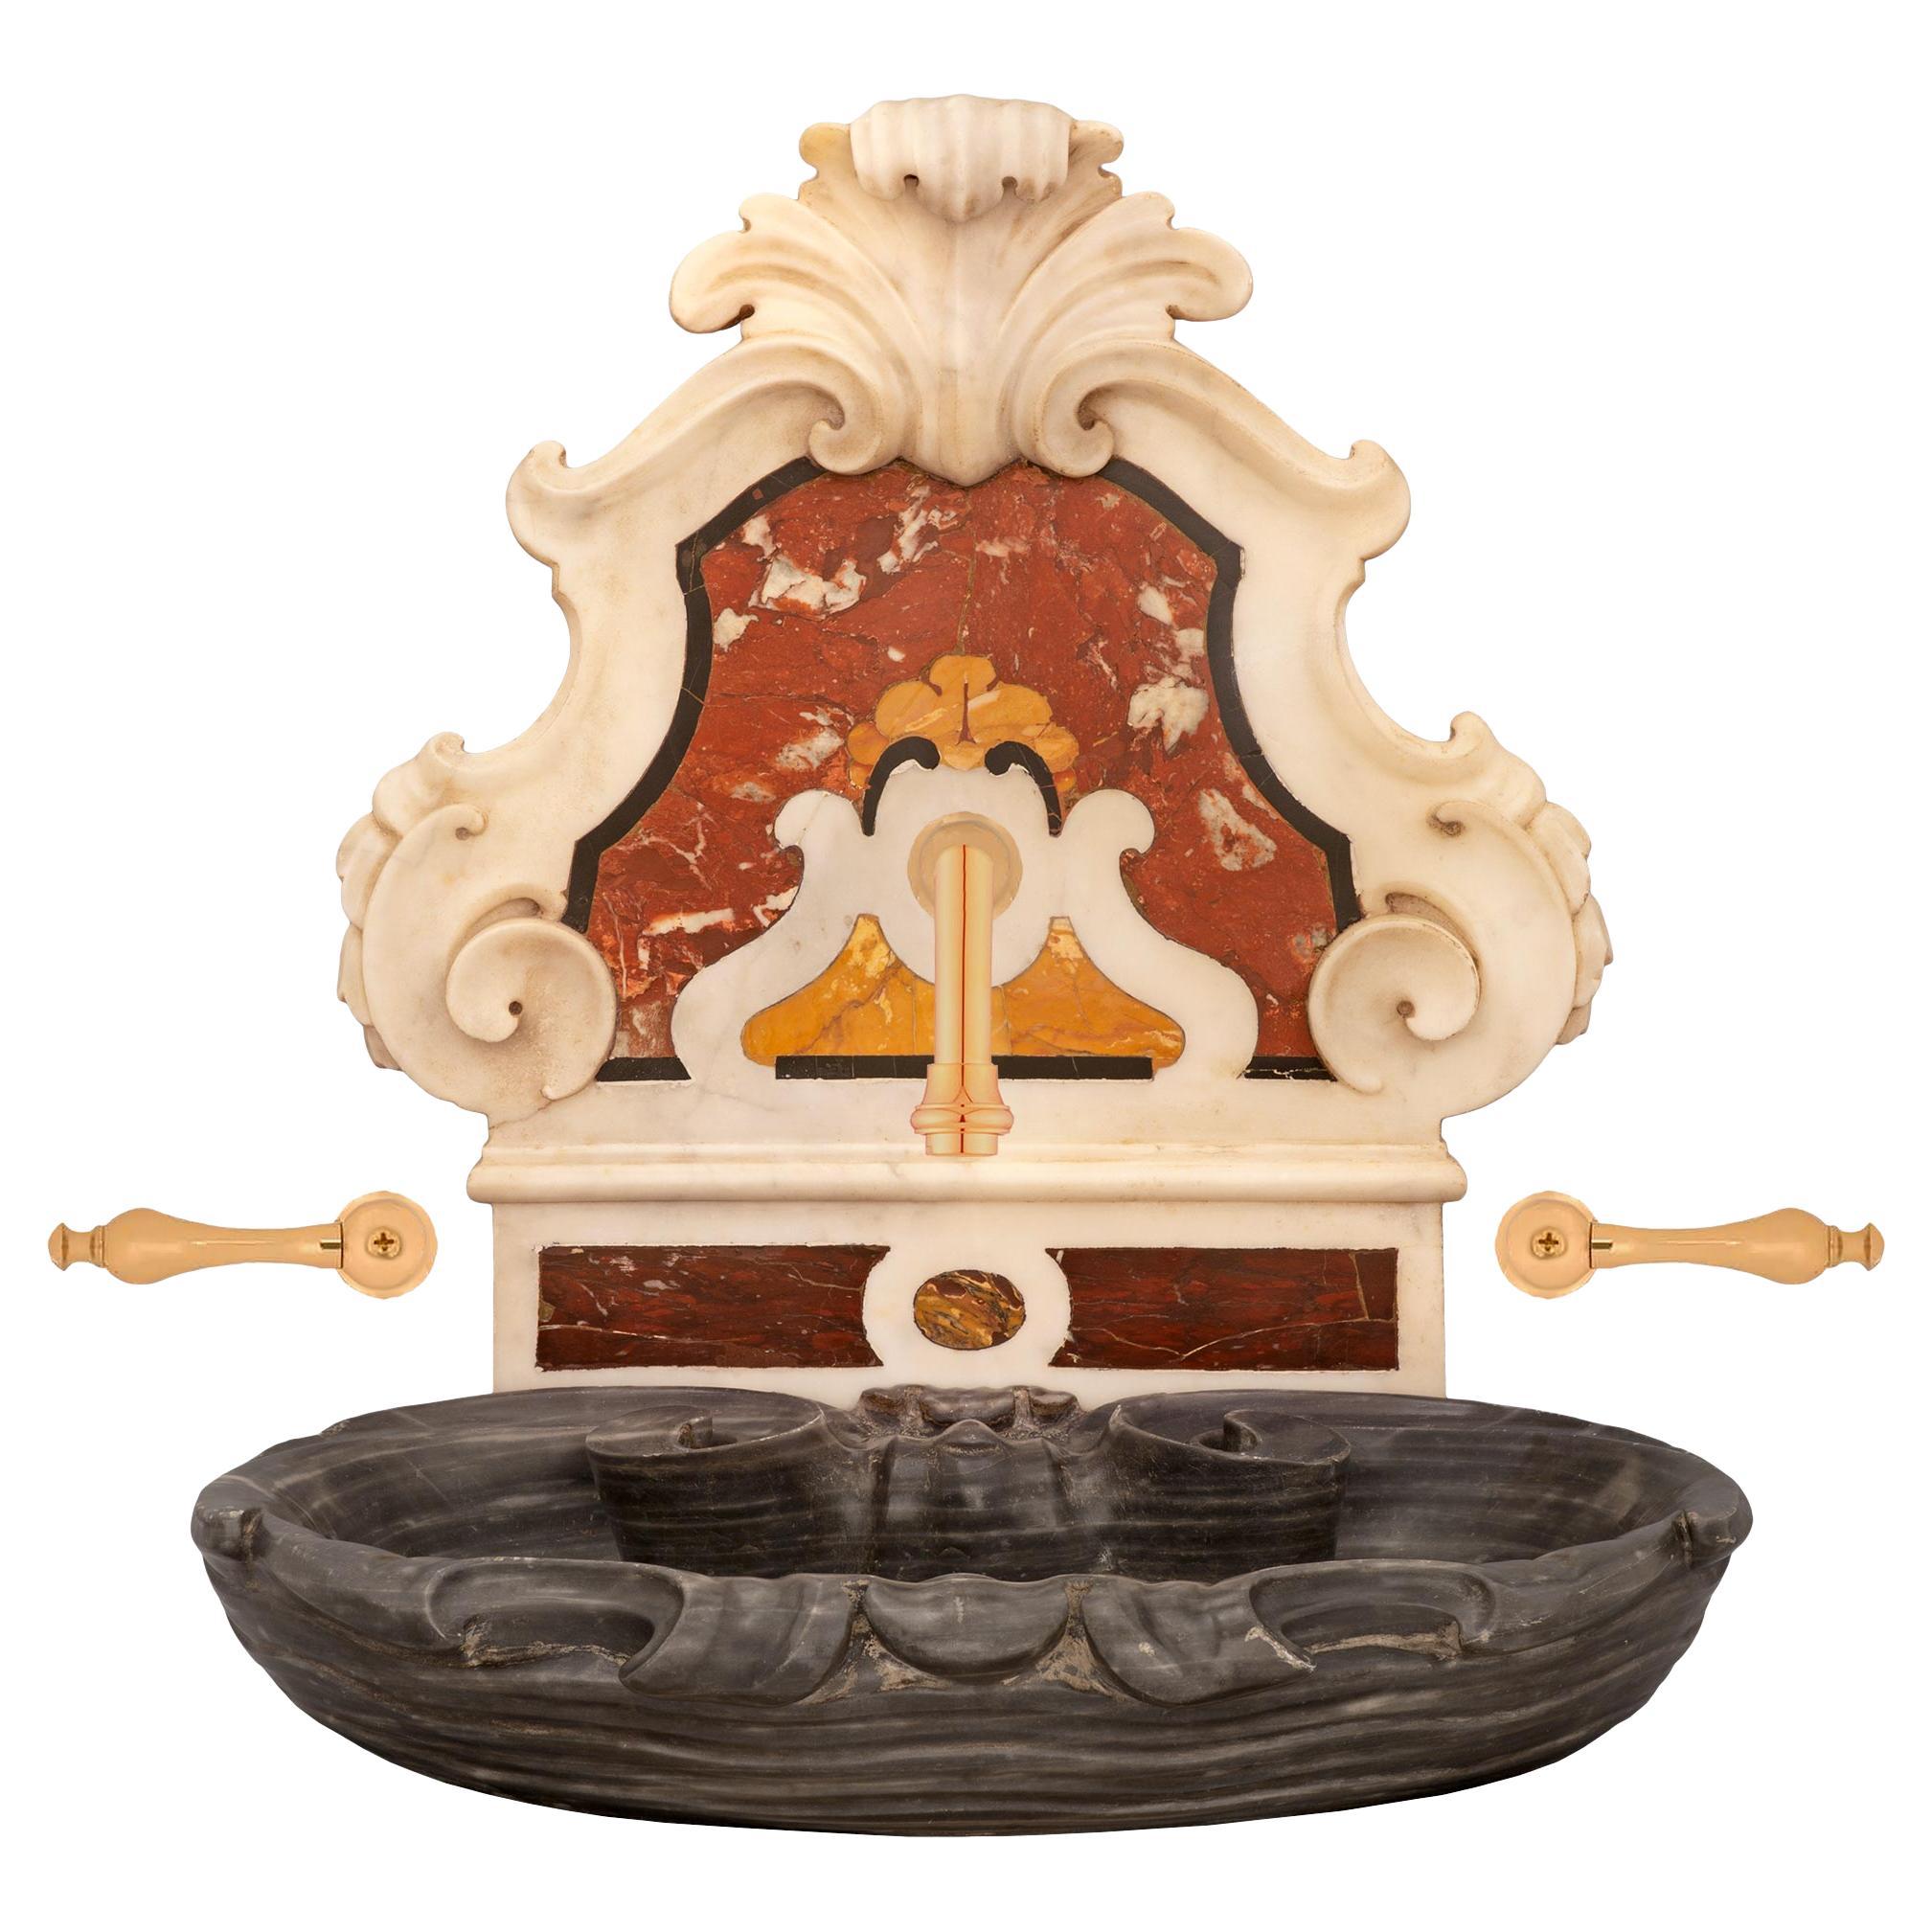 A stunning and extremely decorative Italian 19th century Baroque st. marble basin/fountain. The sink displays a beautiful richly sculpted solid Bleu Turquin marble basin with charming scrolled mottled movements. The backplate displays beautiful